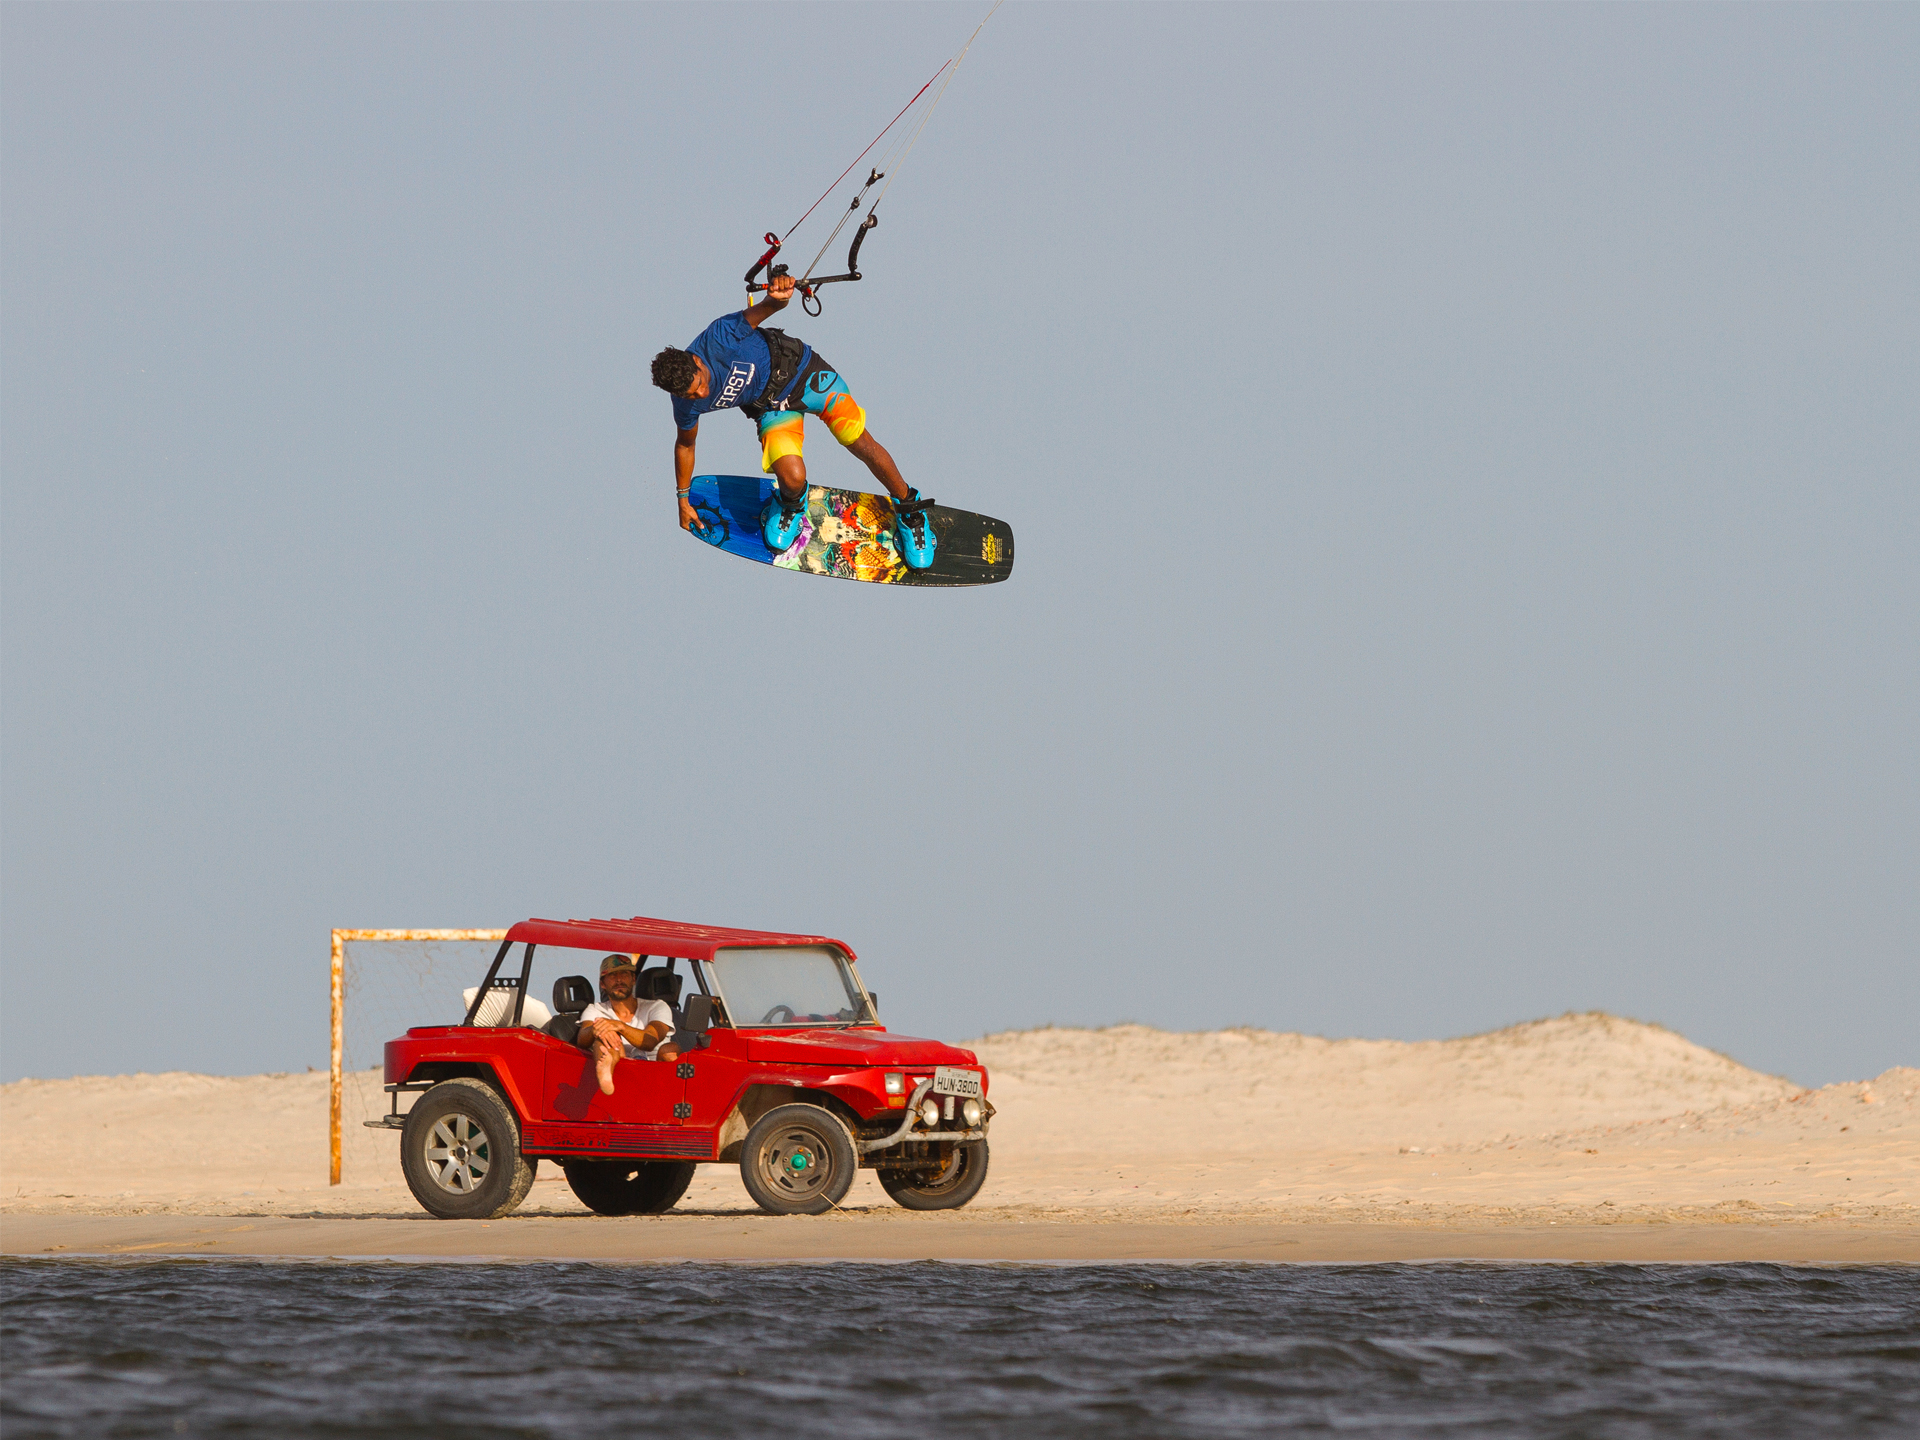 kitesurf wallpaper image - Victor Hays with a tail grab over a Brazilian buggy - Slingshot kiteboarding - in resolution: Standard 4:3 1920 X 1440